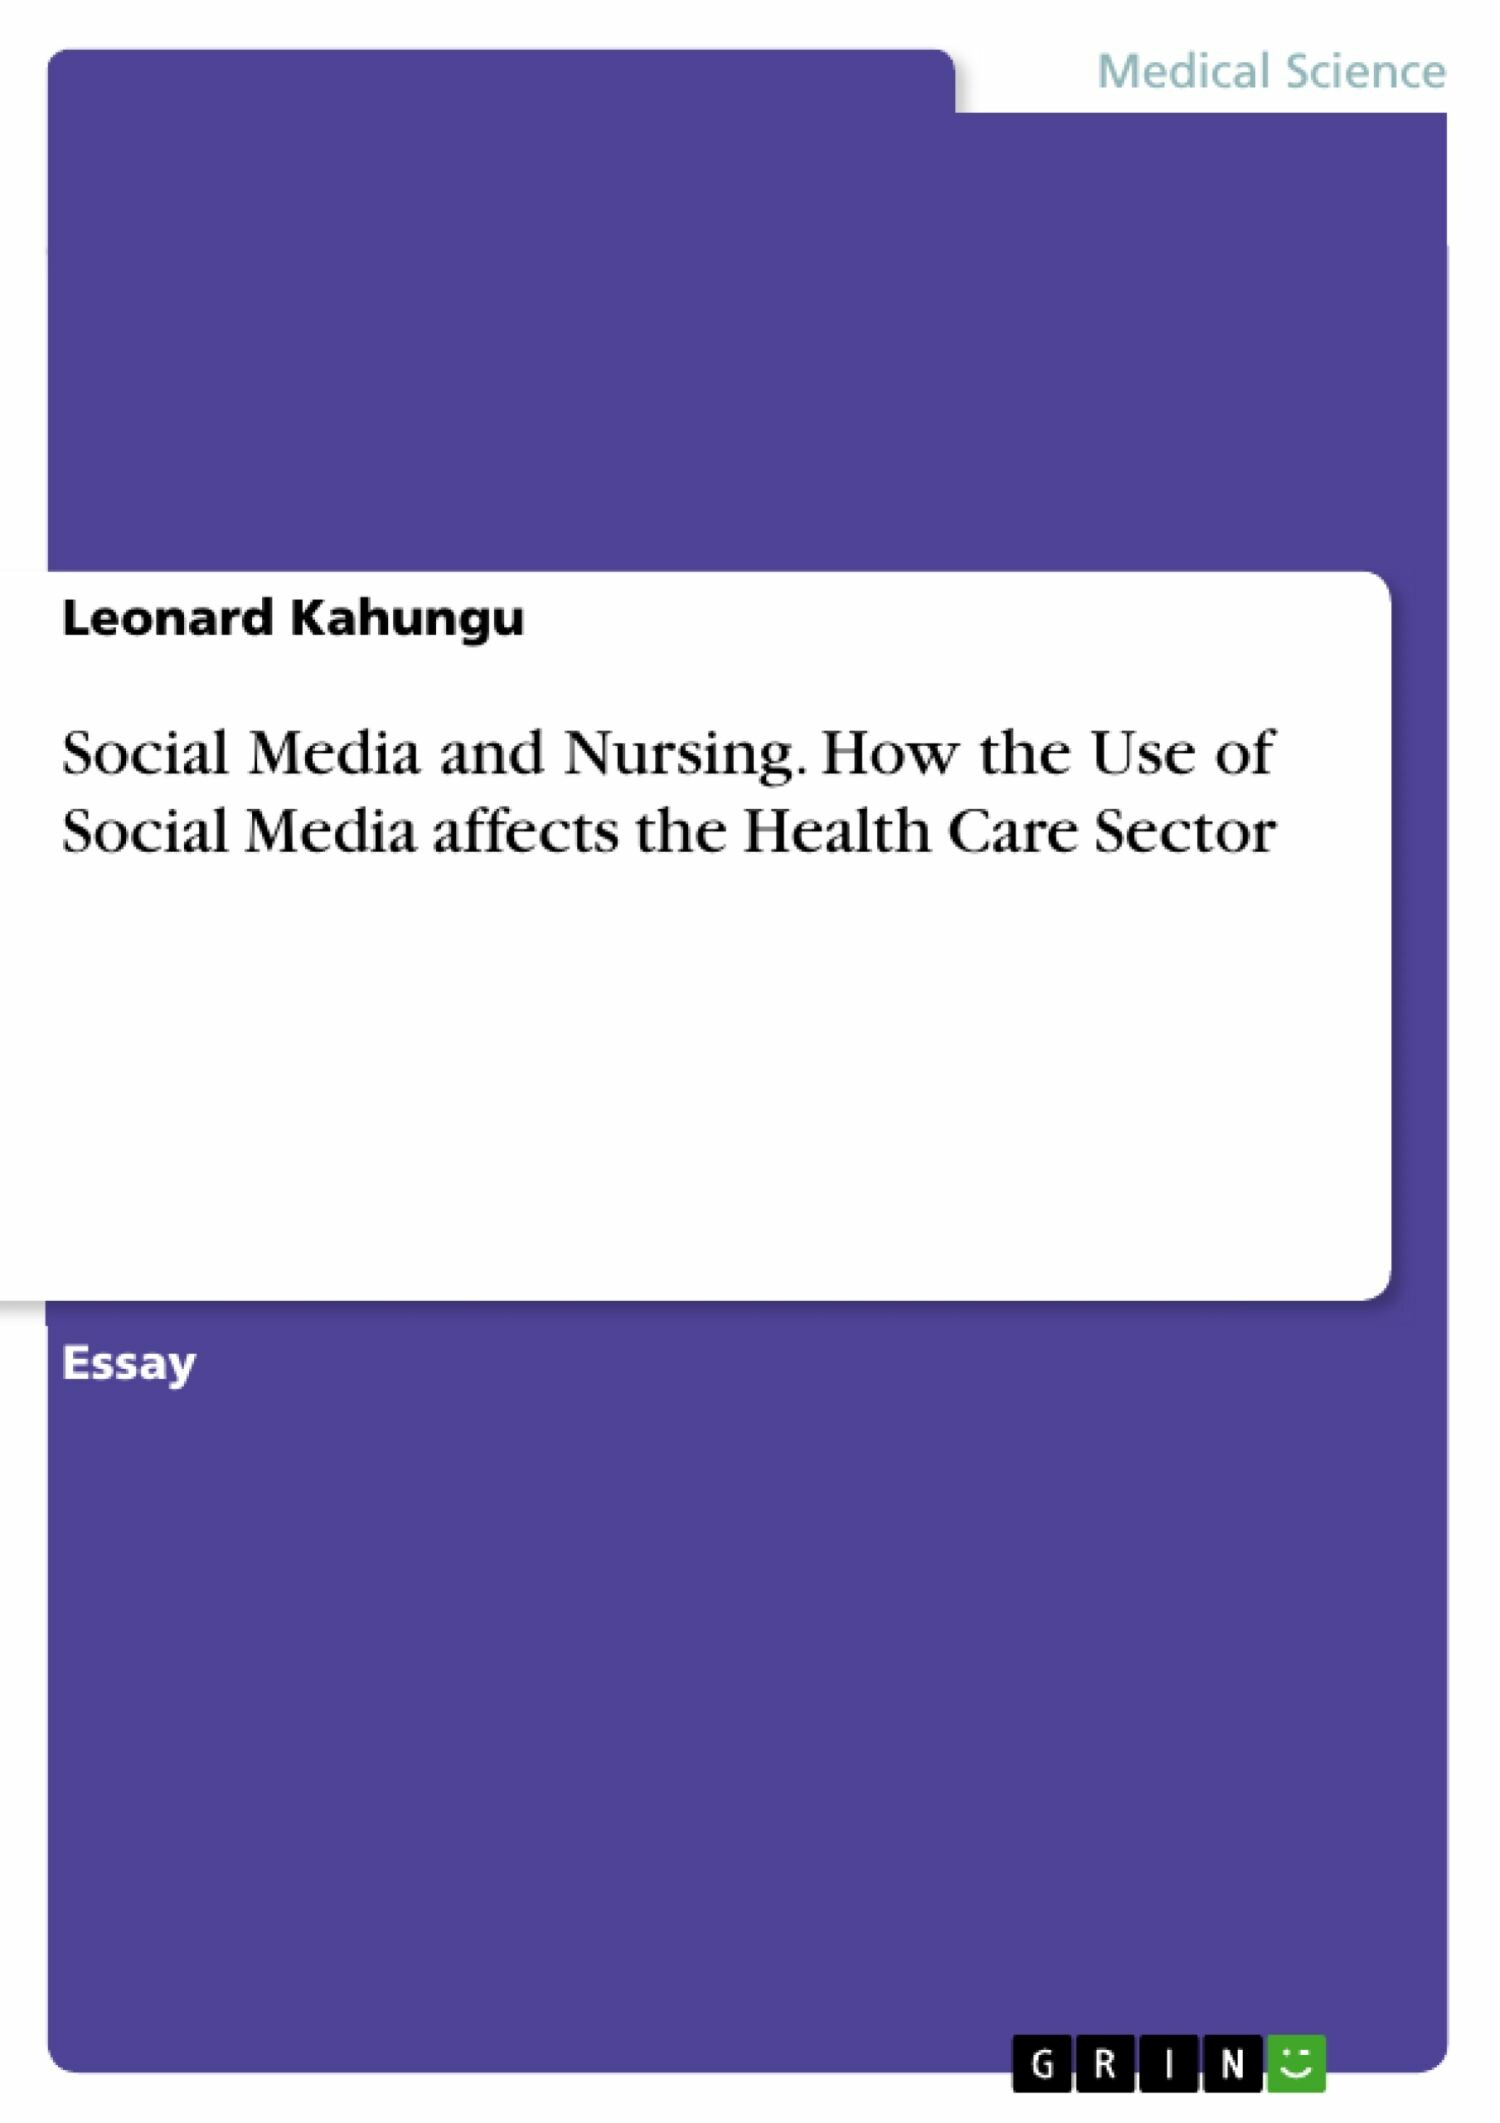 Social Media and Nursing. How the Use of Social Media affects the Health Care Sector